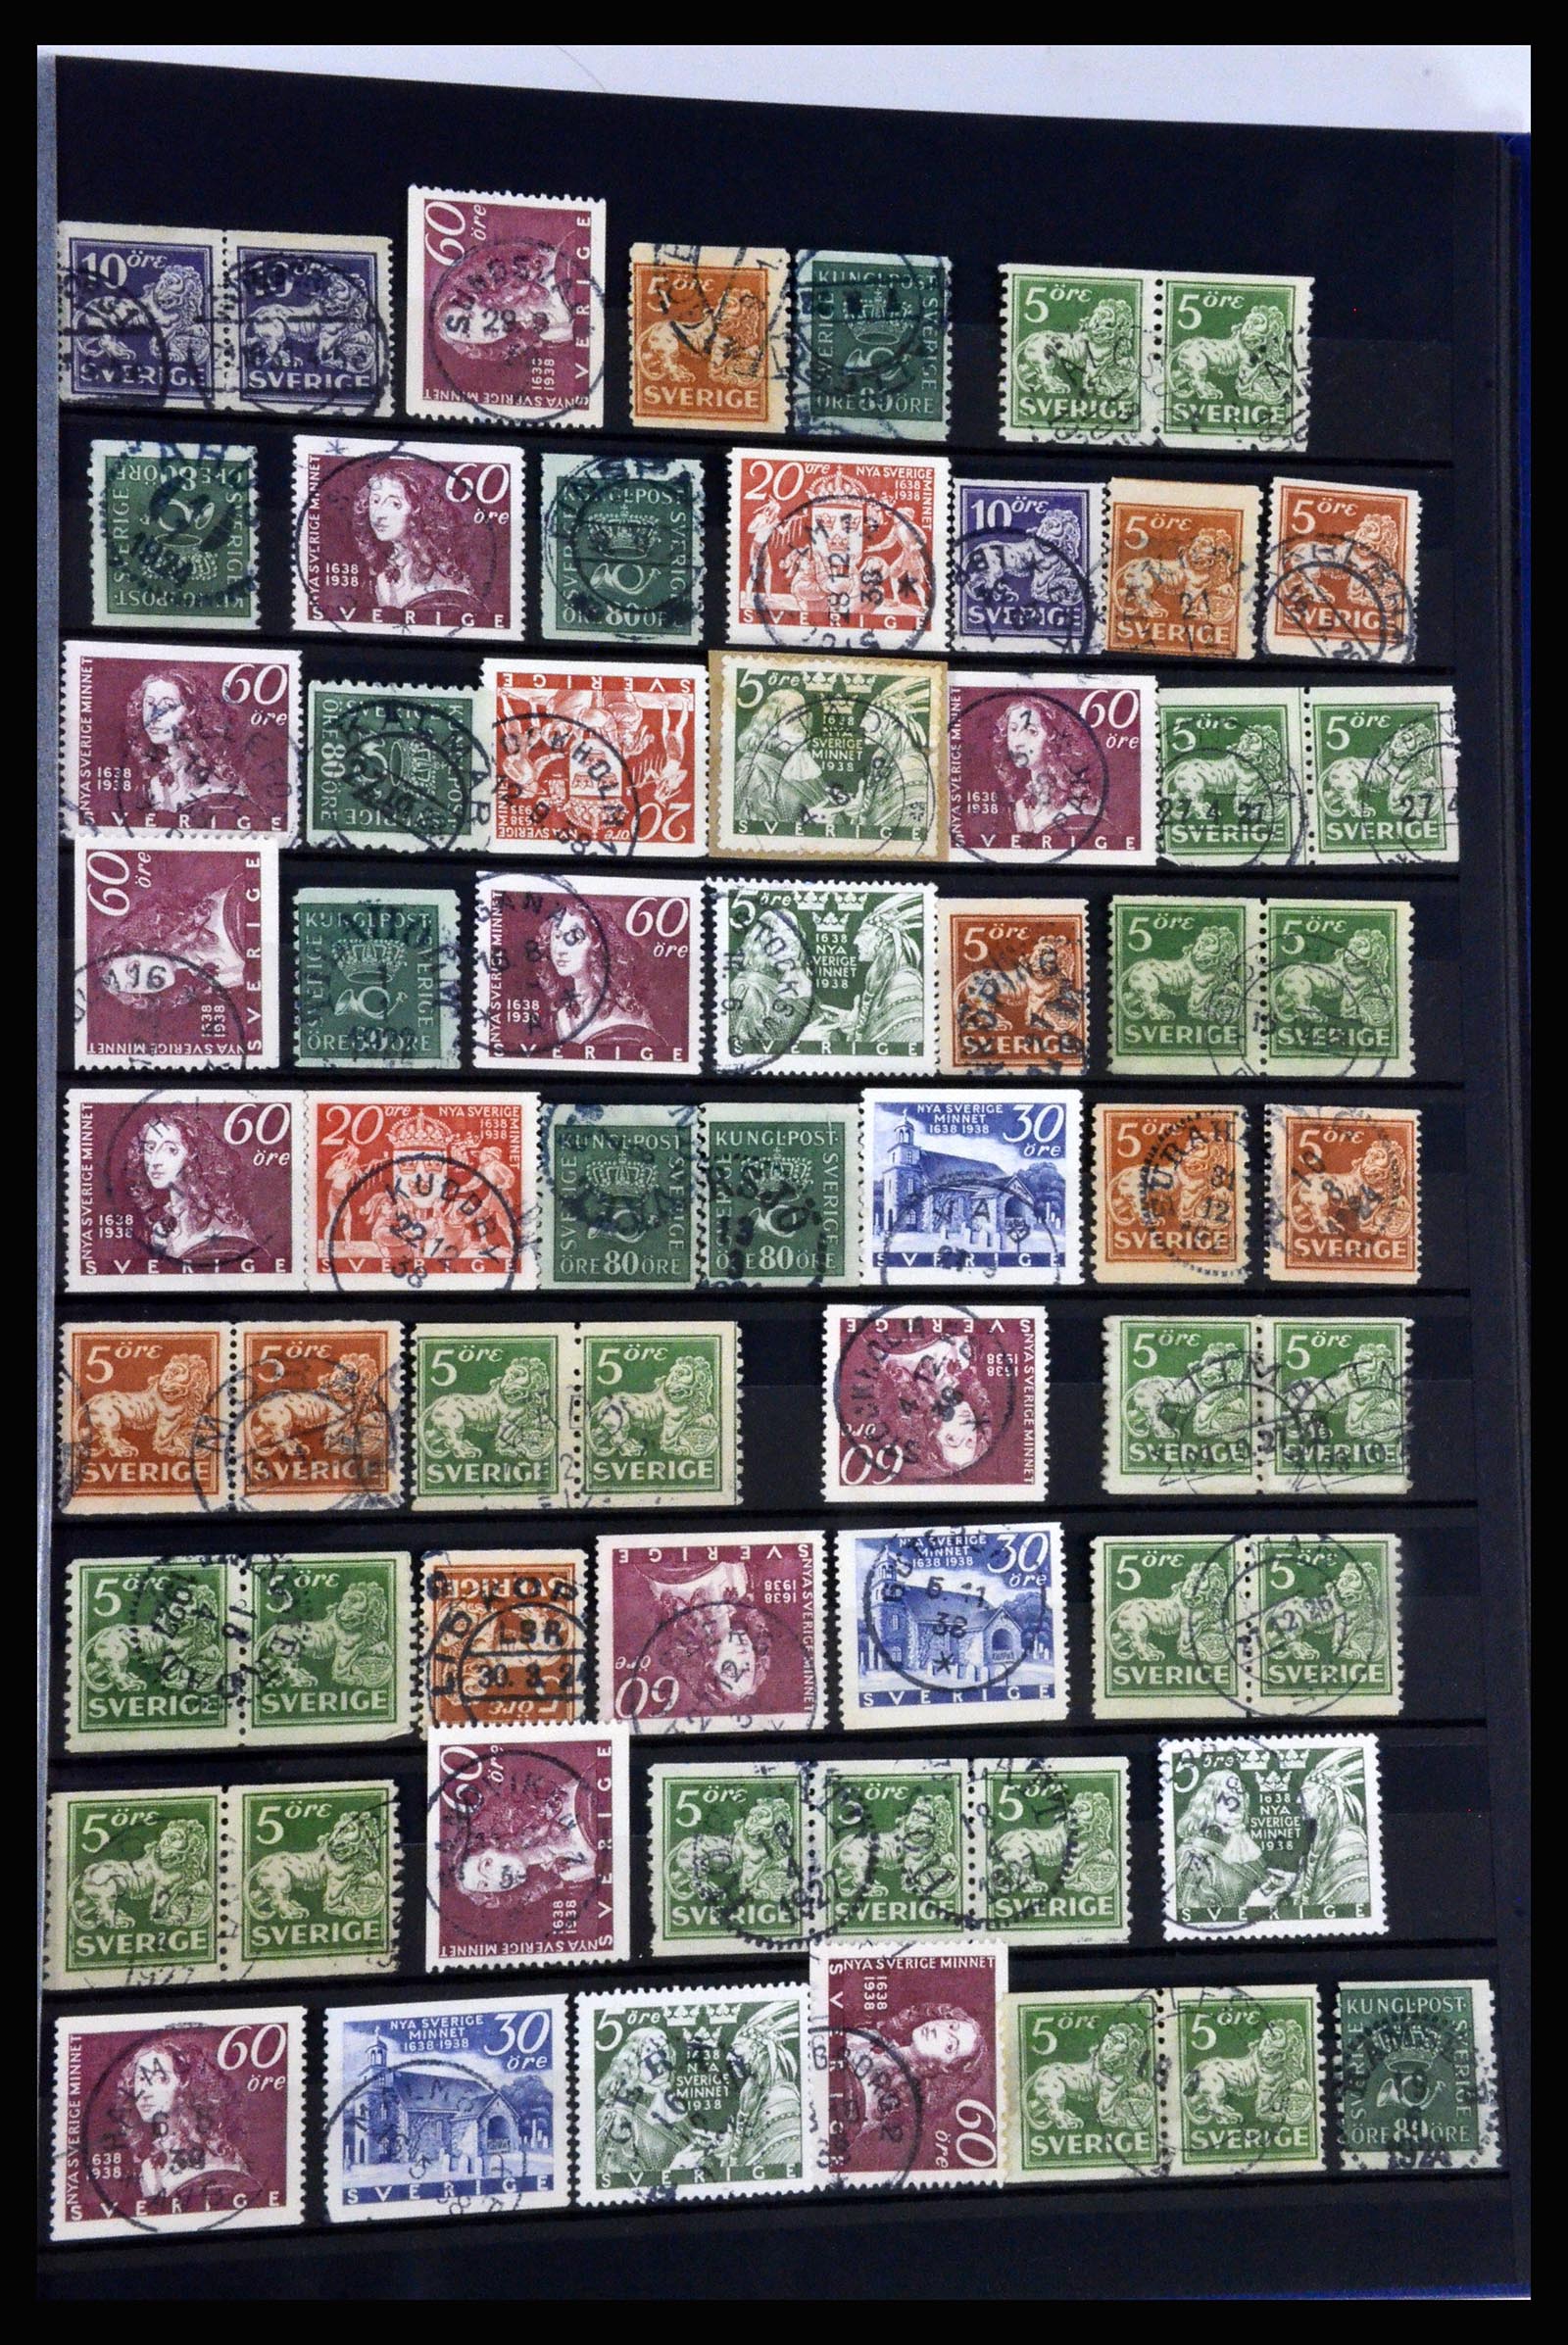 36316 047 - Stamp collection 36316 Sweden cancellations 1920-1938.